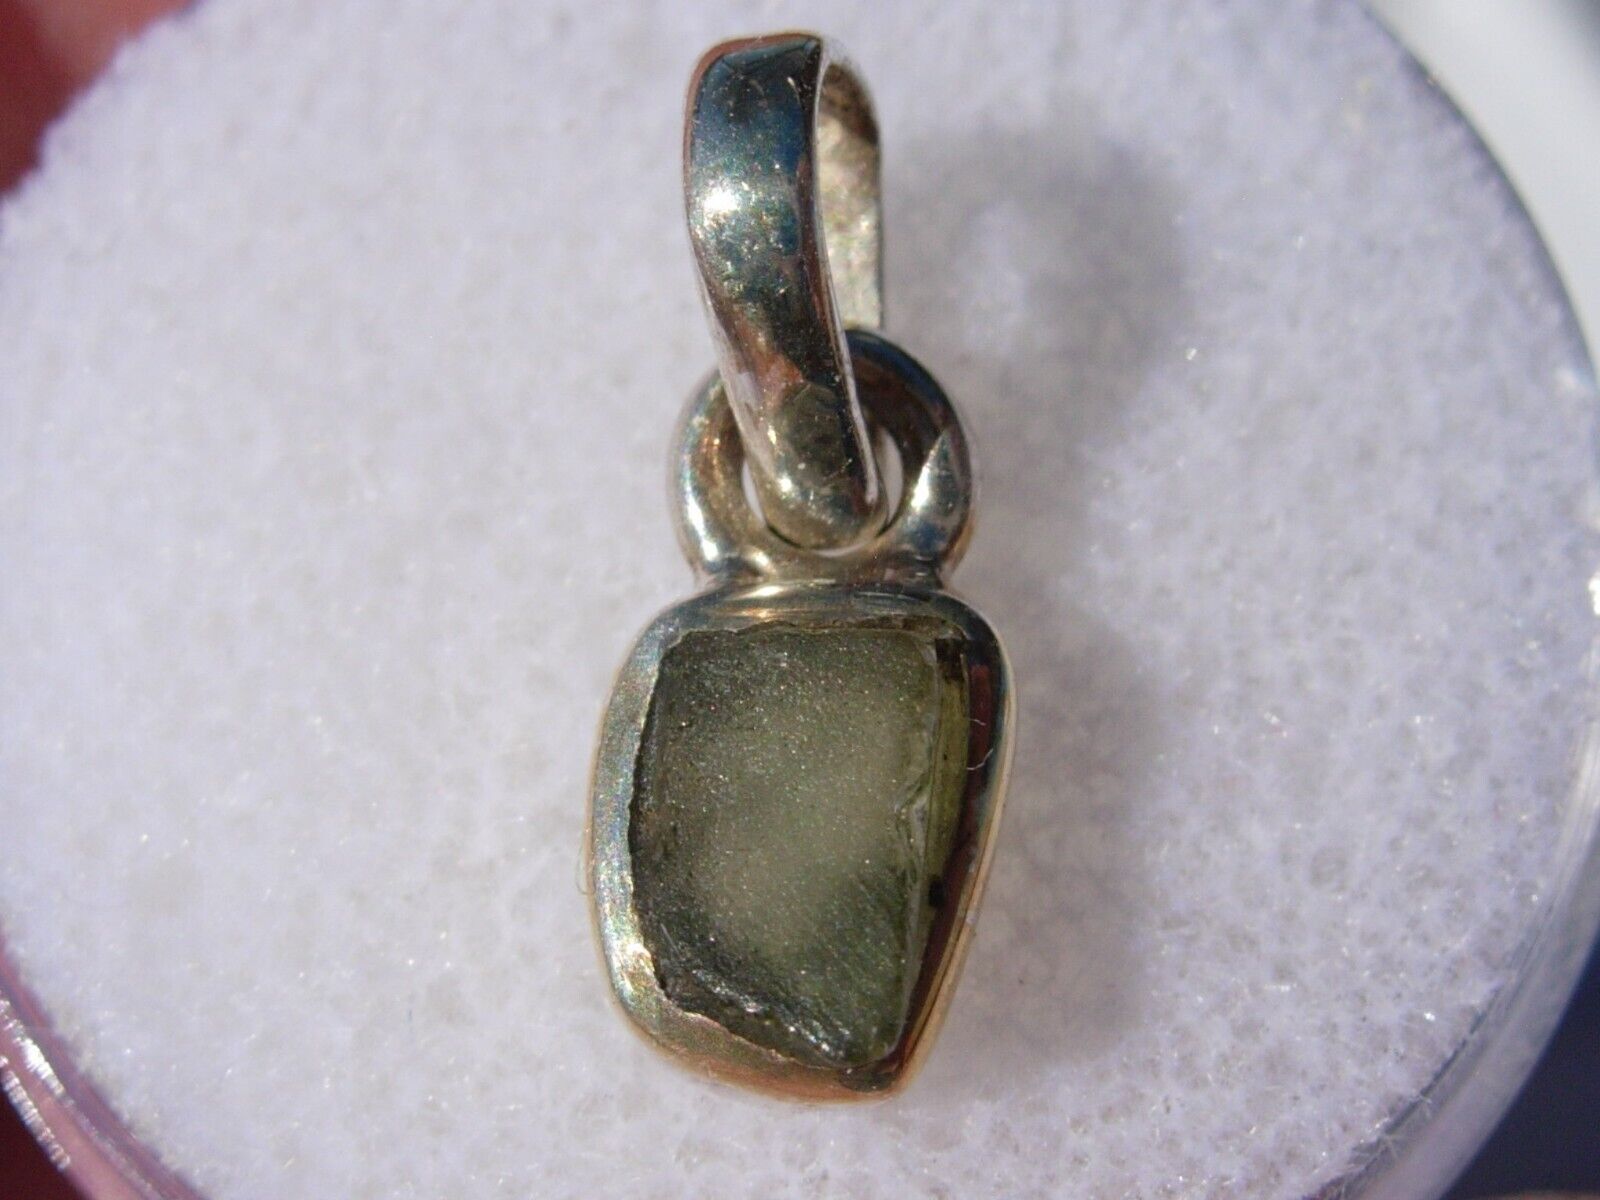 4.195 carats MOLDAVITE .925 silver Pendant about 15mm for necklace with a COA